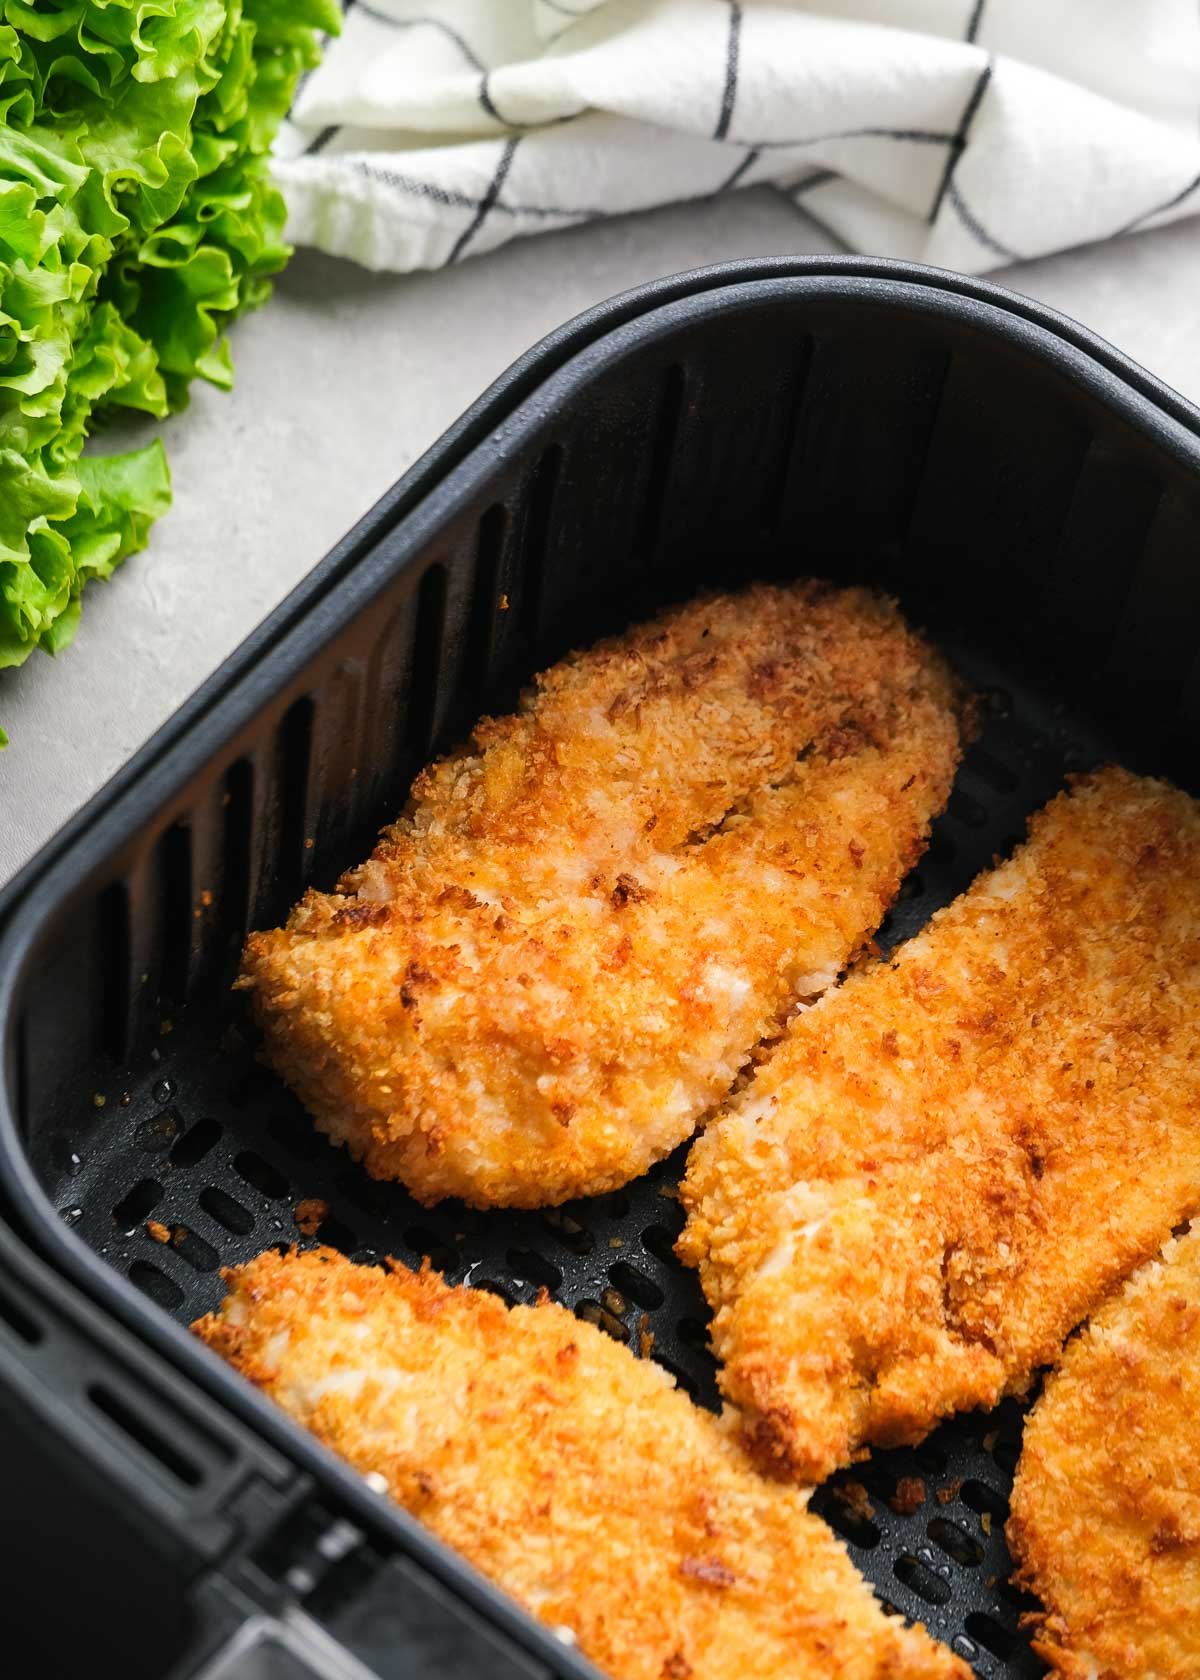 cooked, juicy breaded chicken in an air fryer